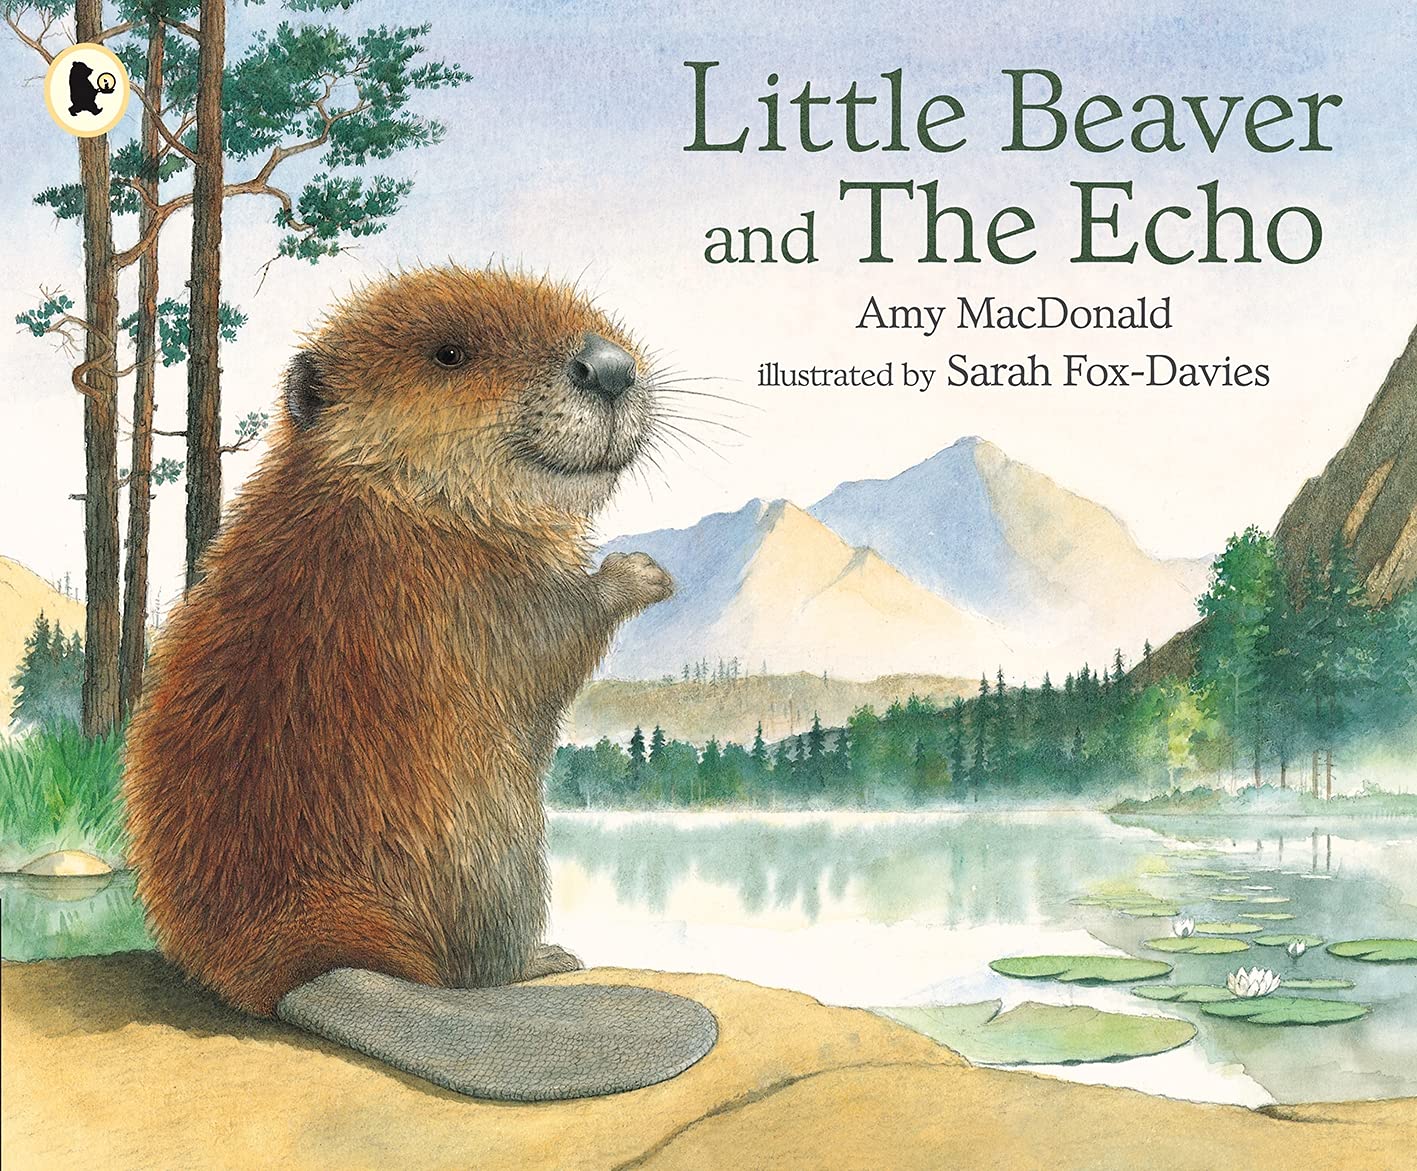 IMG : Little Beaver and The Eco